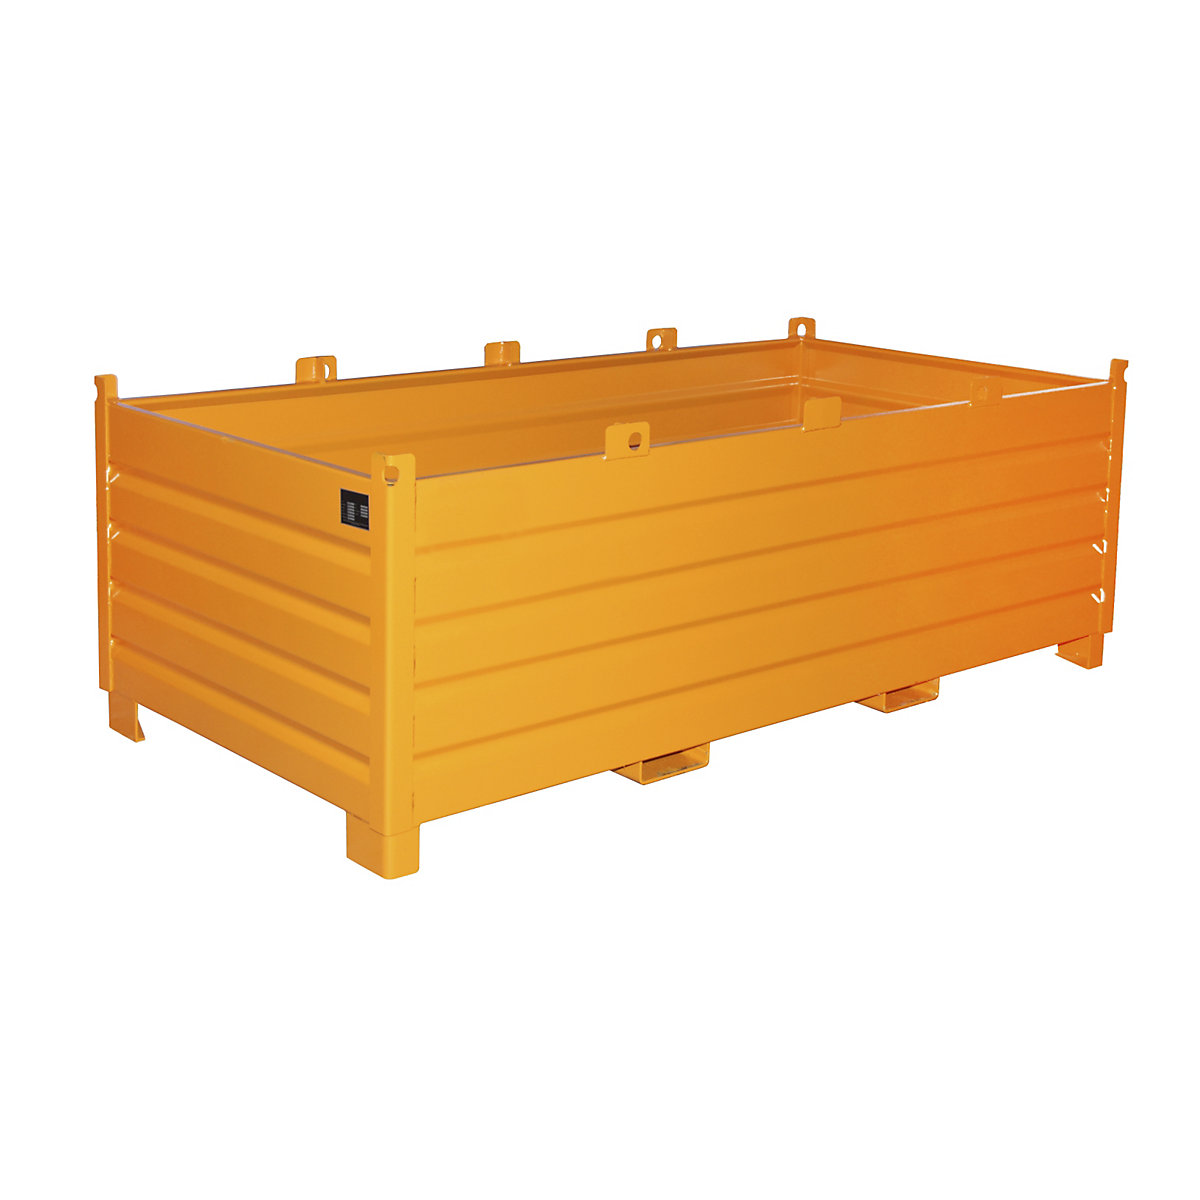 Waste container – eurokraft pro